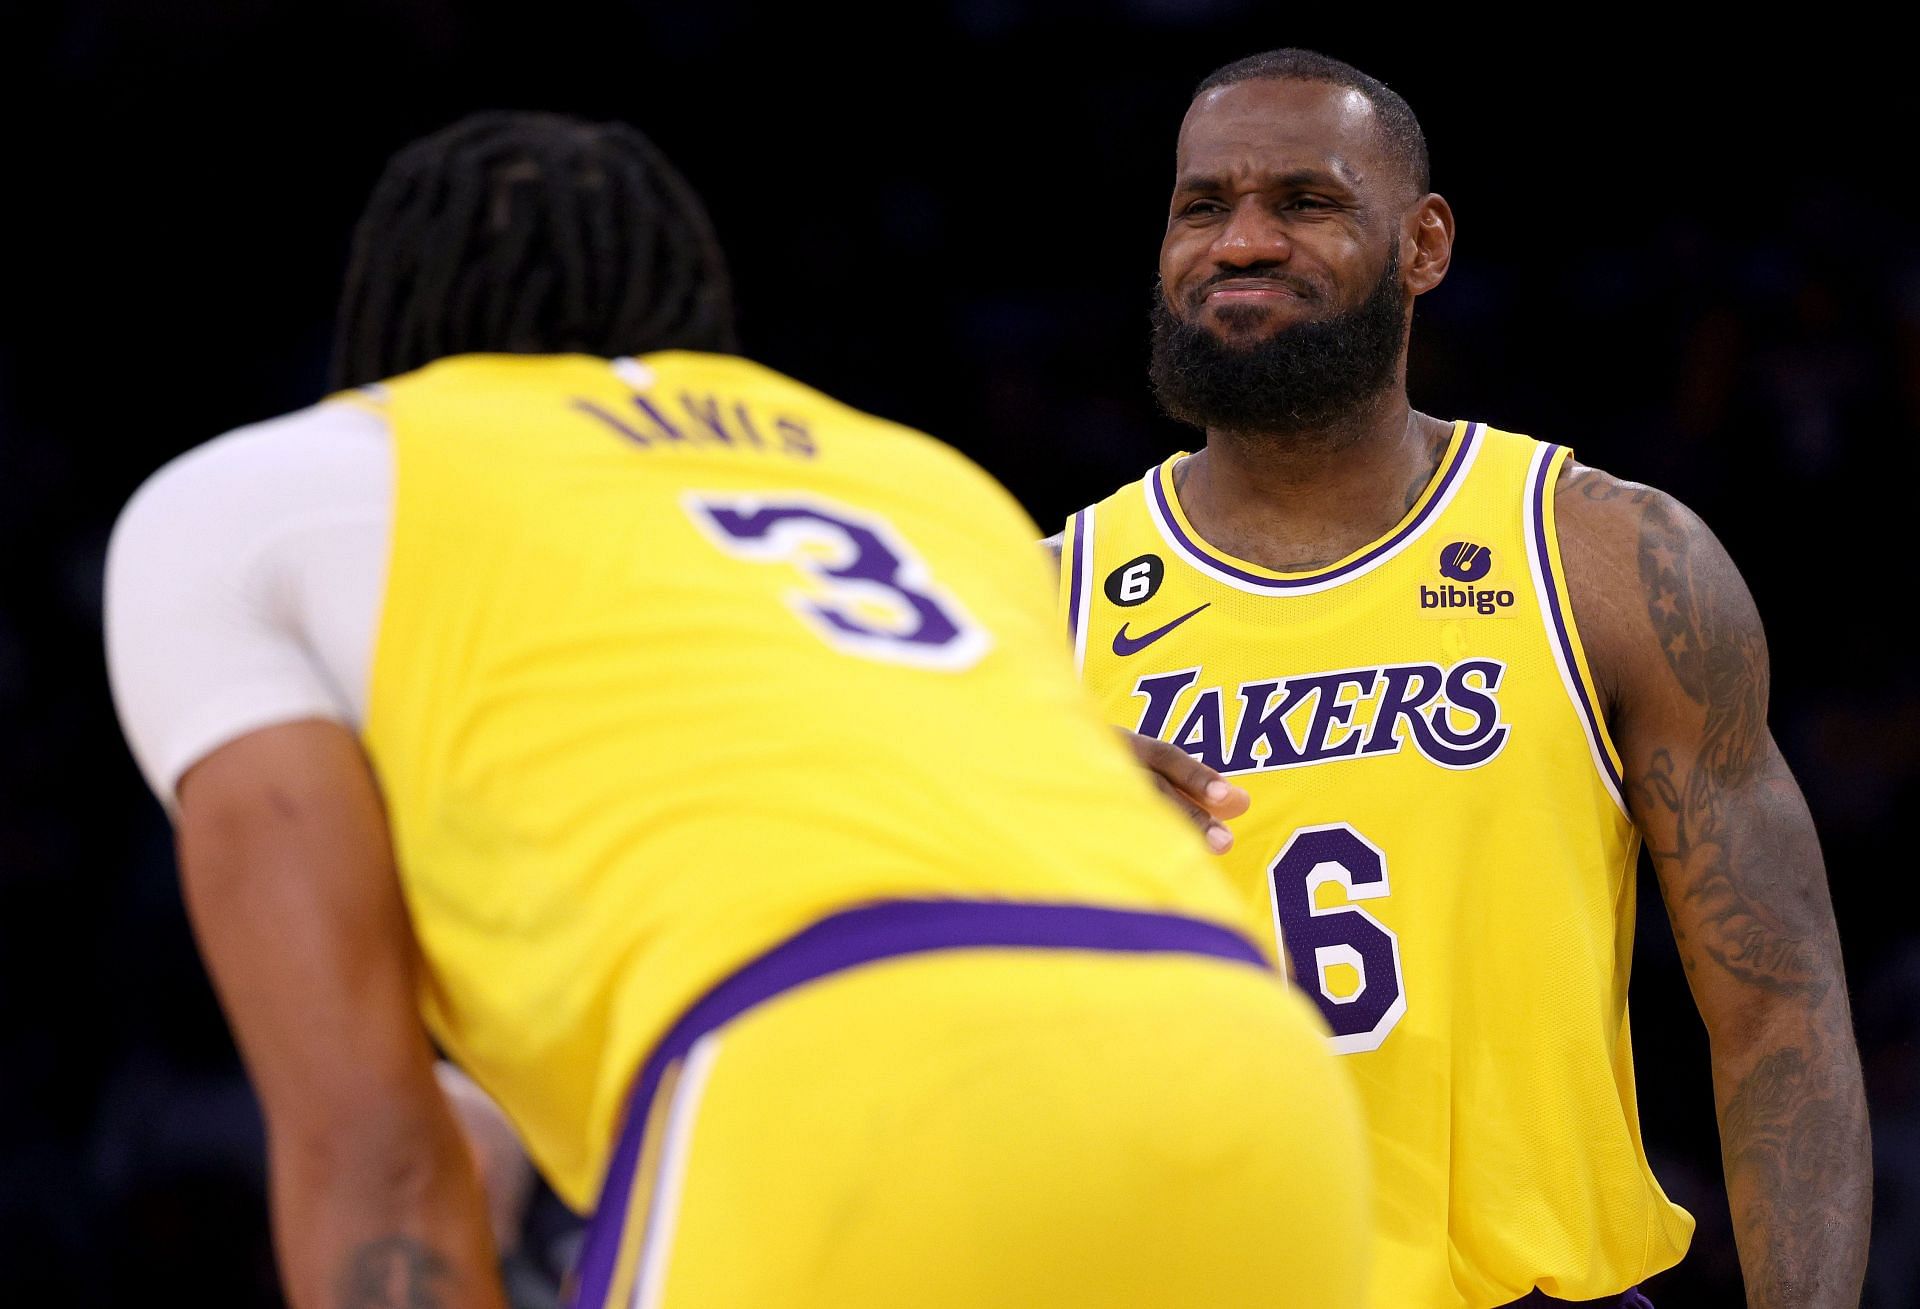 LeBron James Is Not Requesting Trade from Lakers, Despite 'Verified' Parody  Impersonation Account